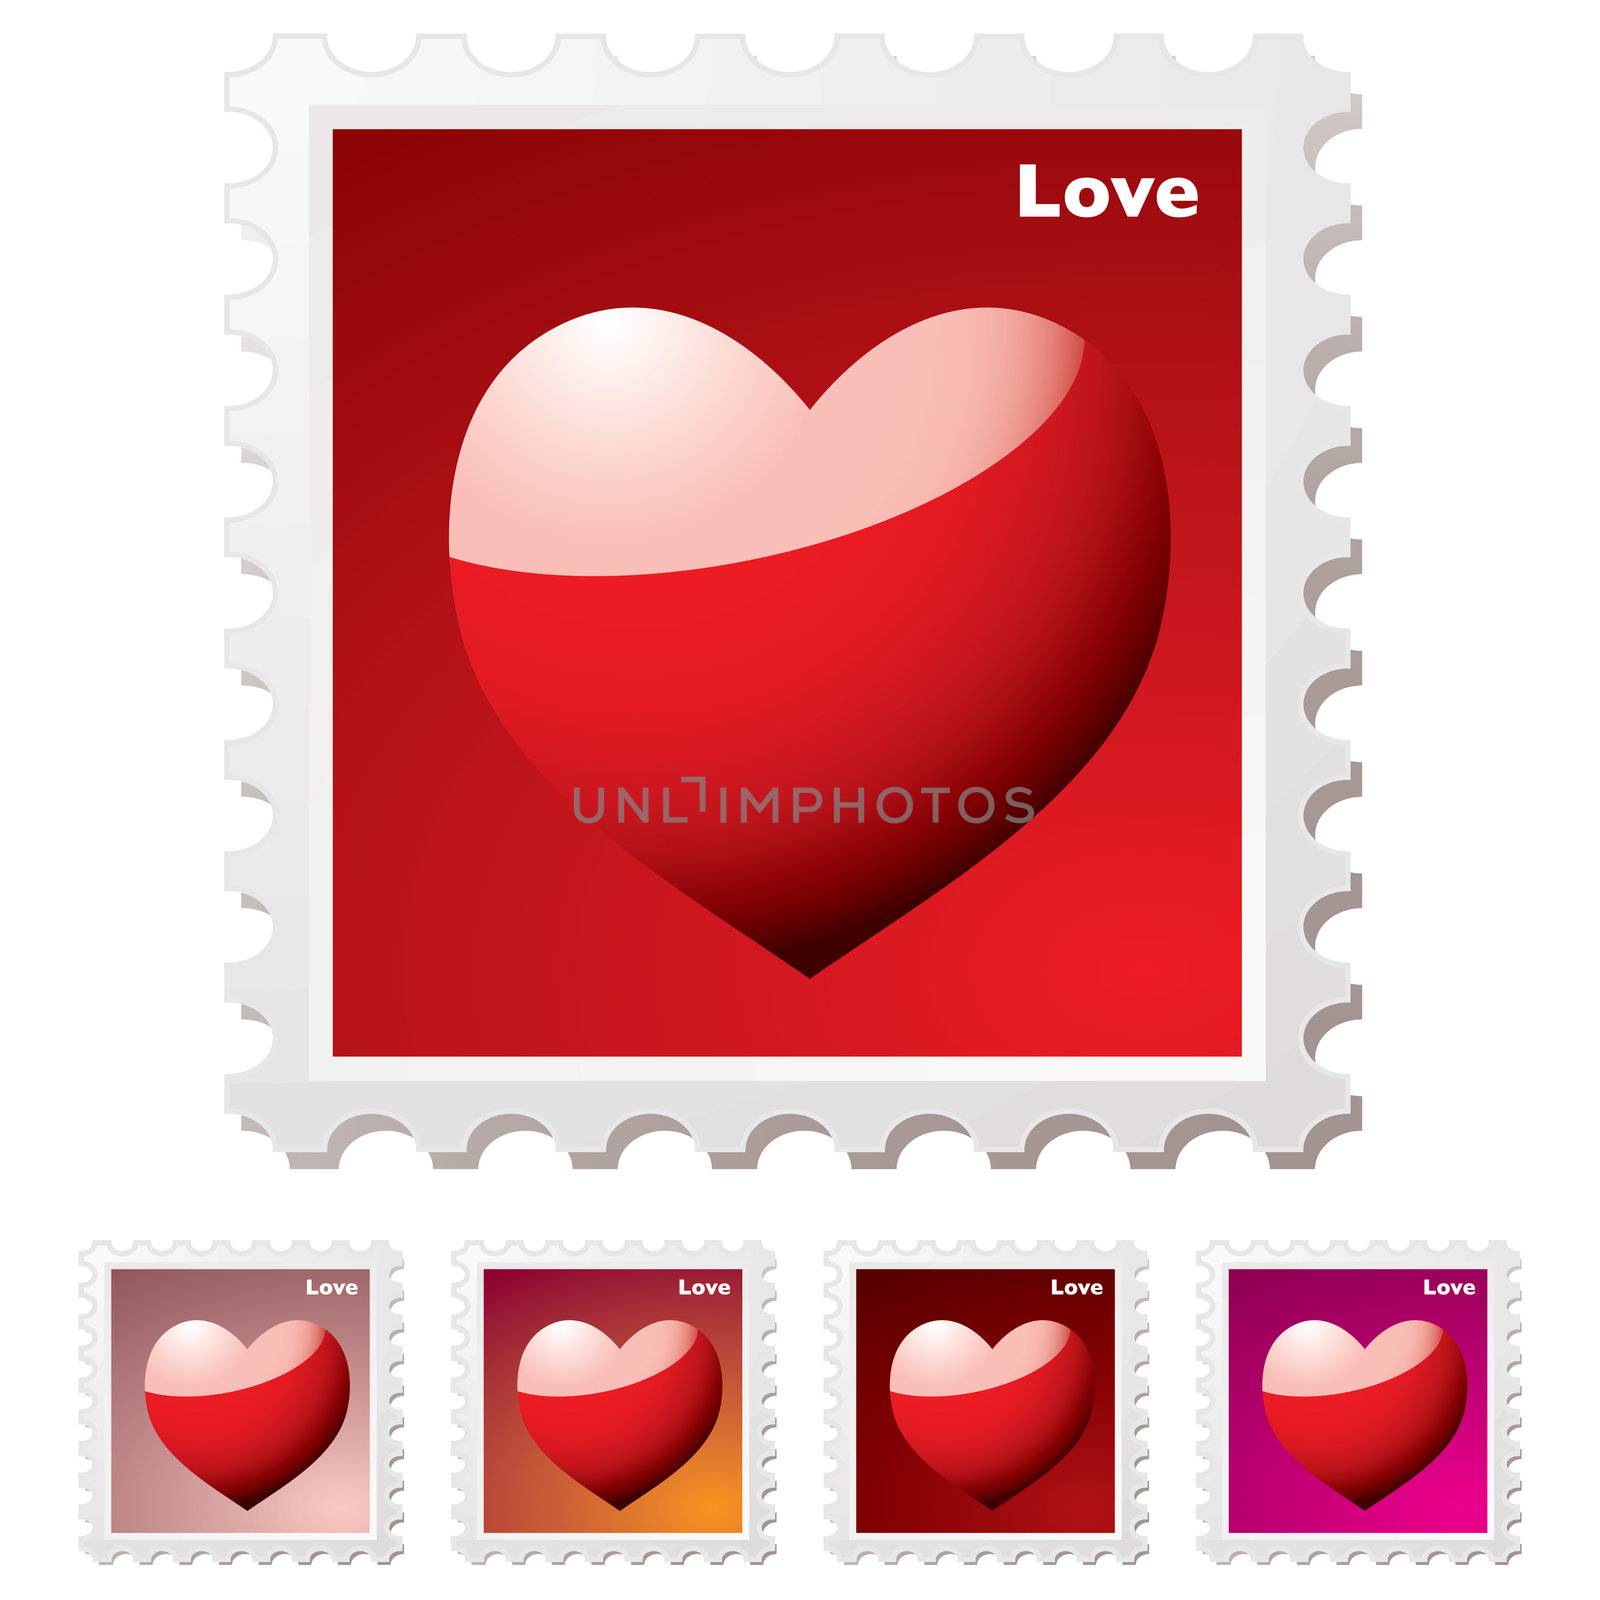 Collection of love heart stamps in variation of red hues